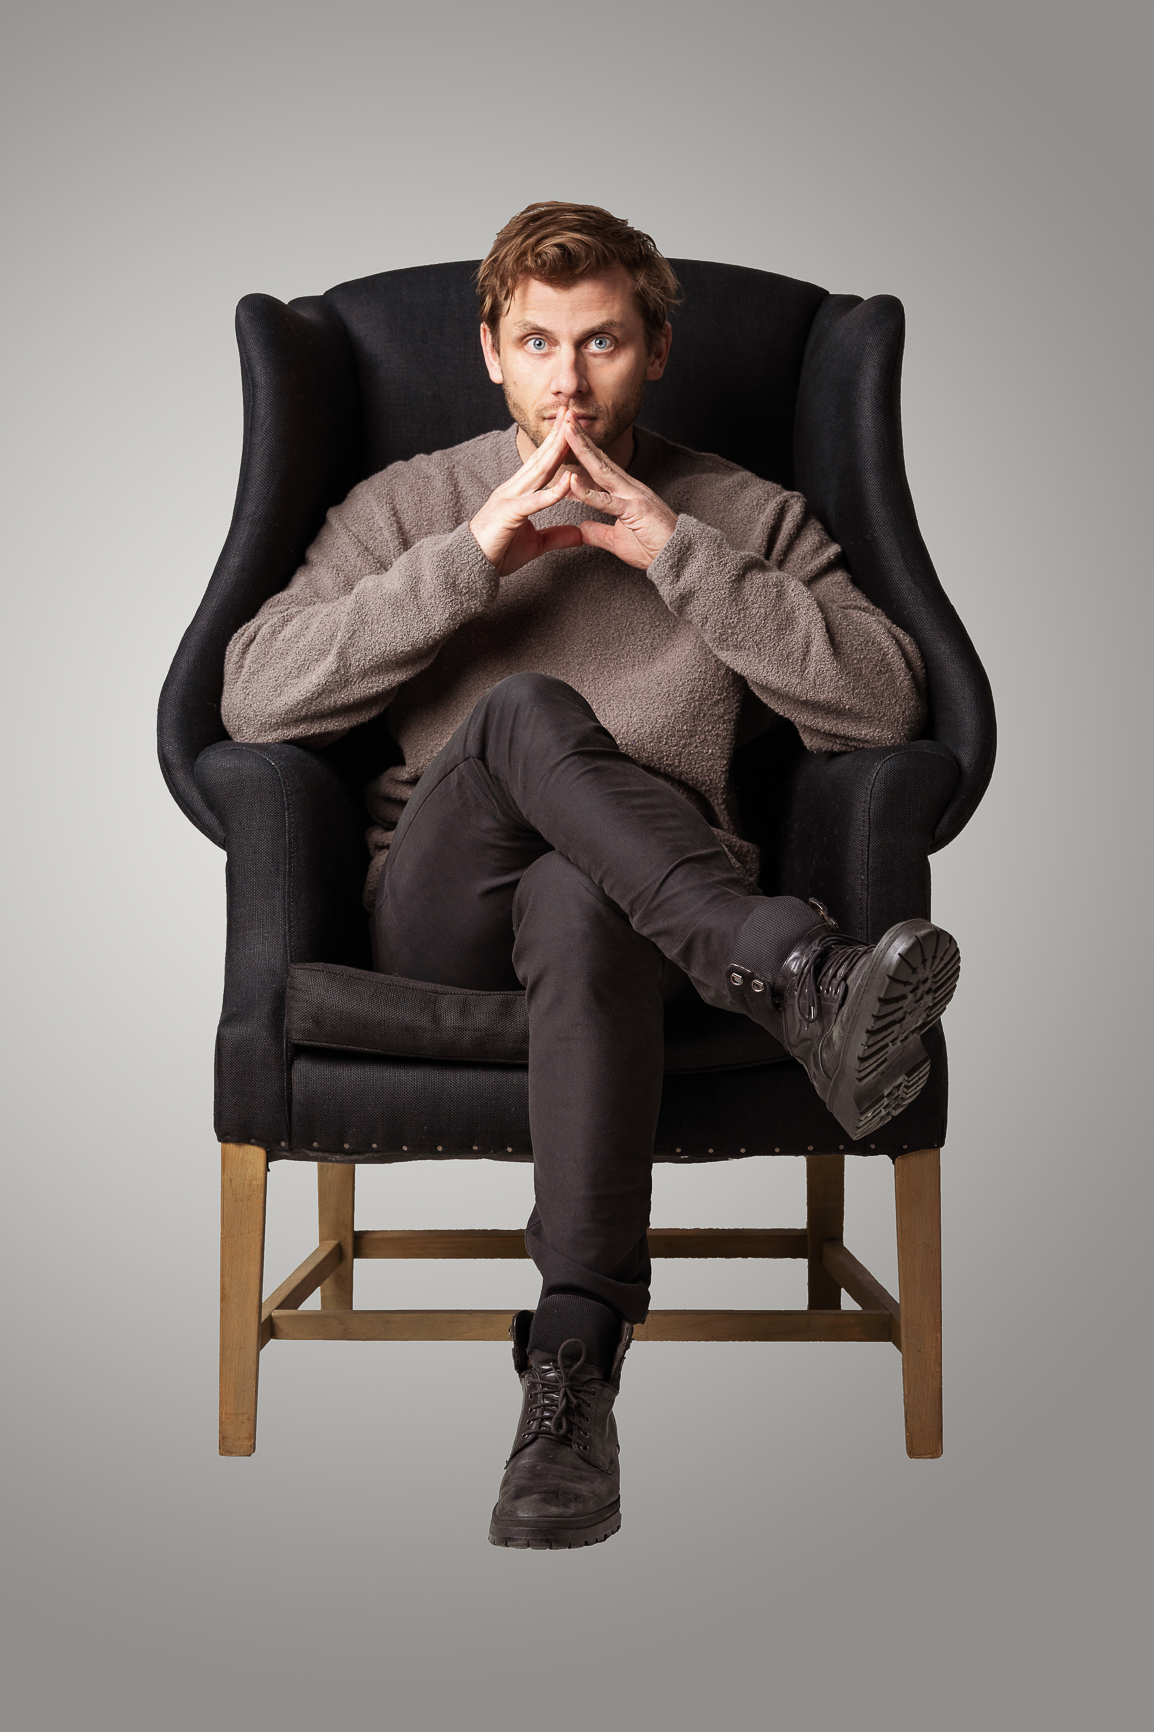 Comedian Charlie Berens sits in a black armchair in front of a white background